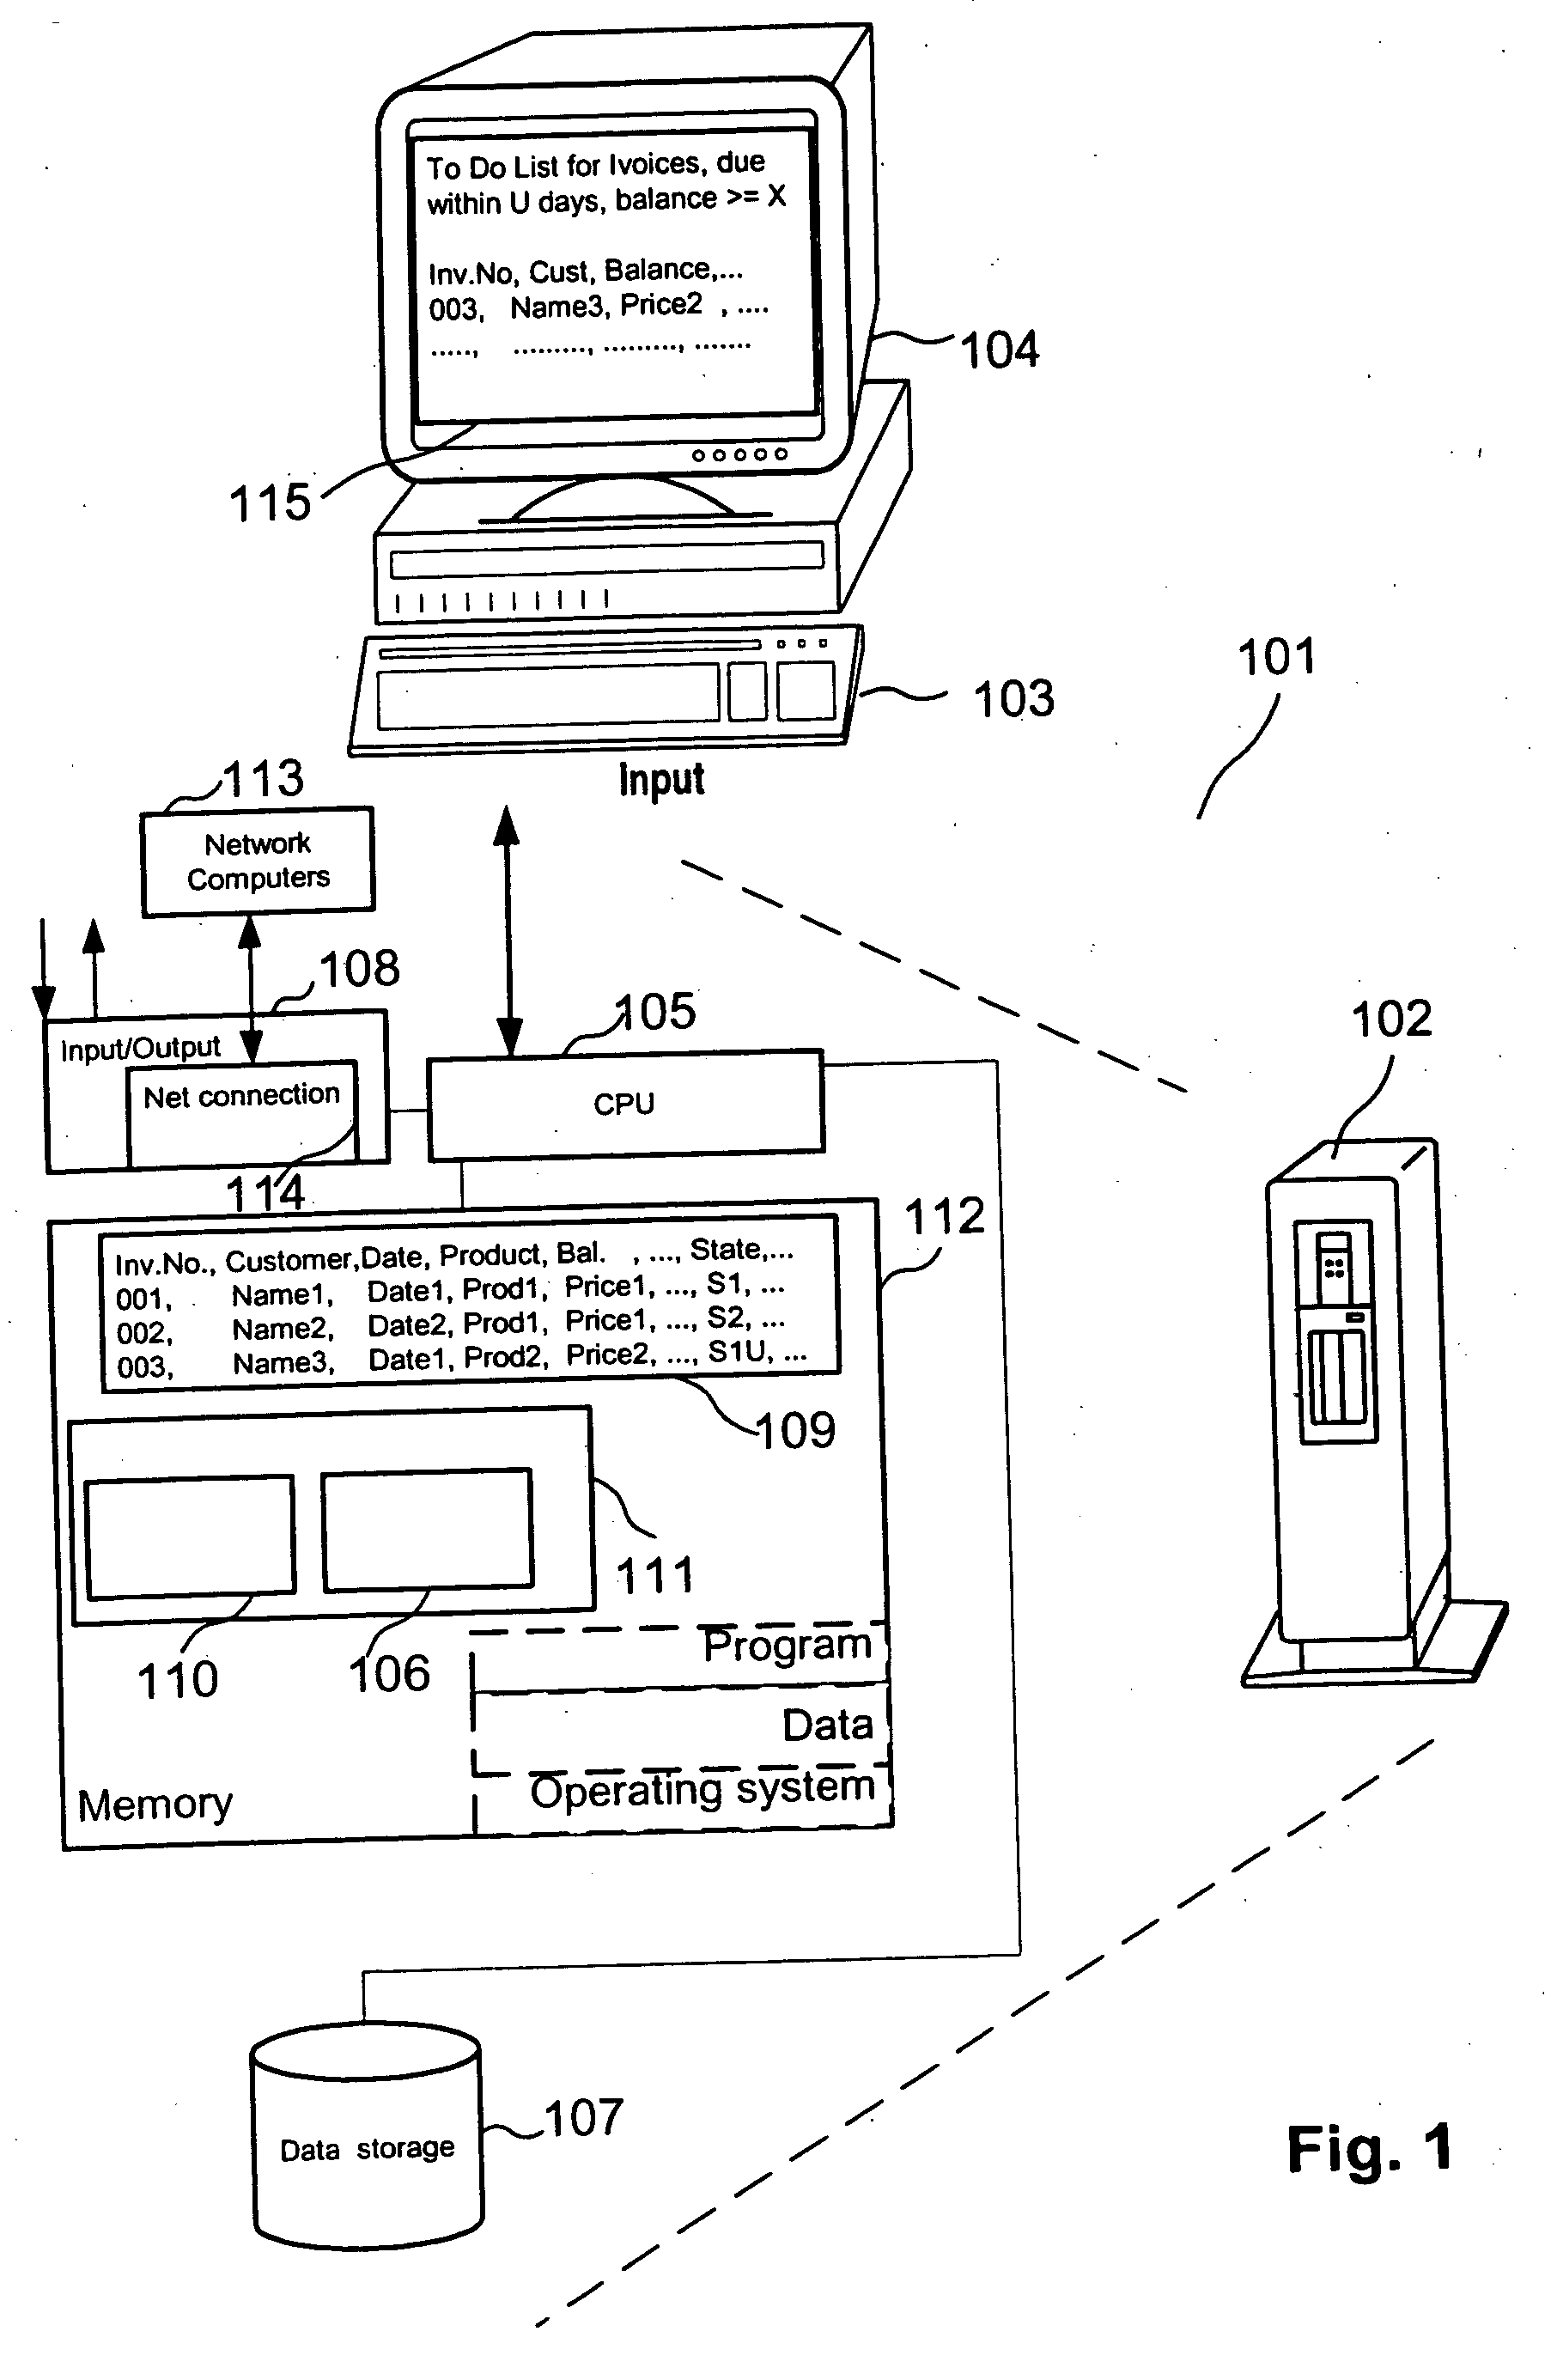 Method and software application for computer-aided cash collection